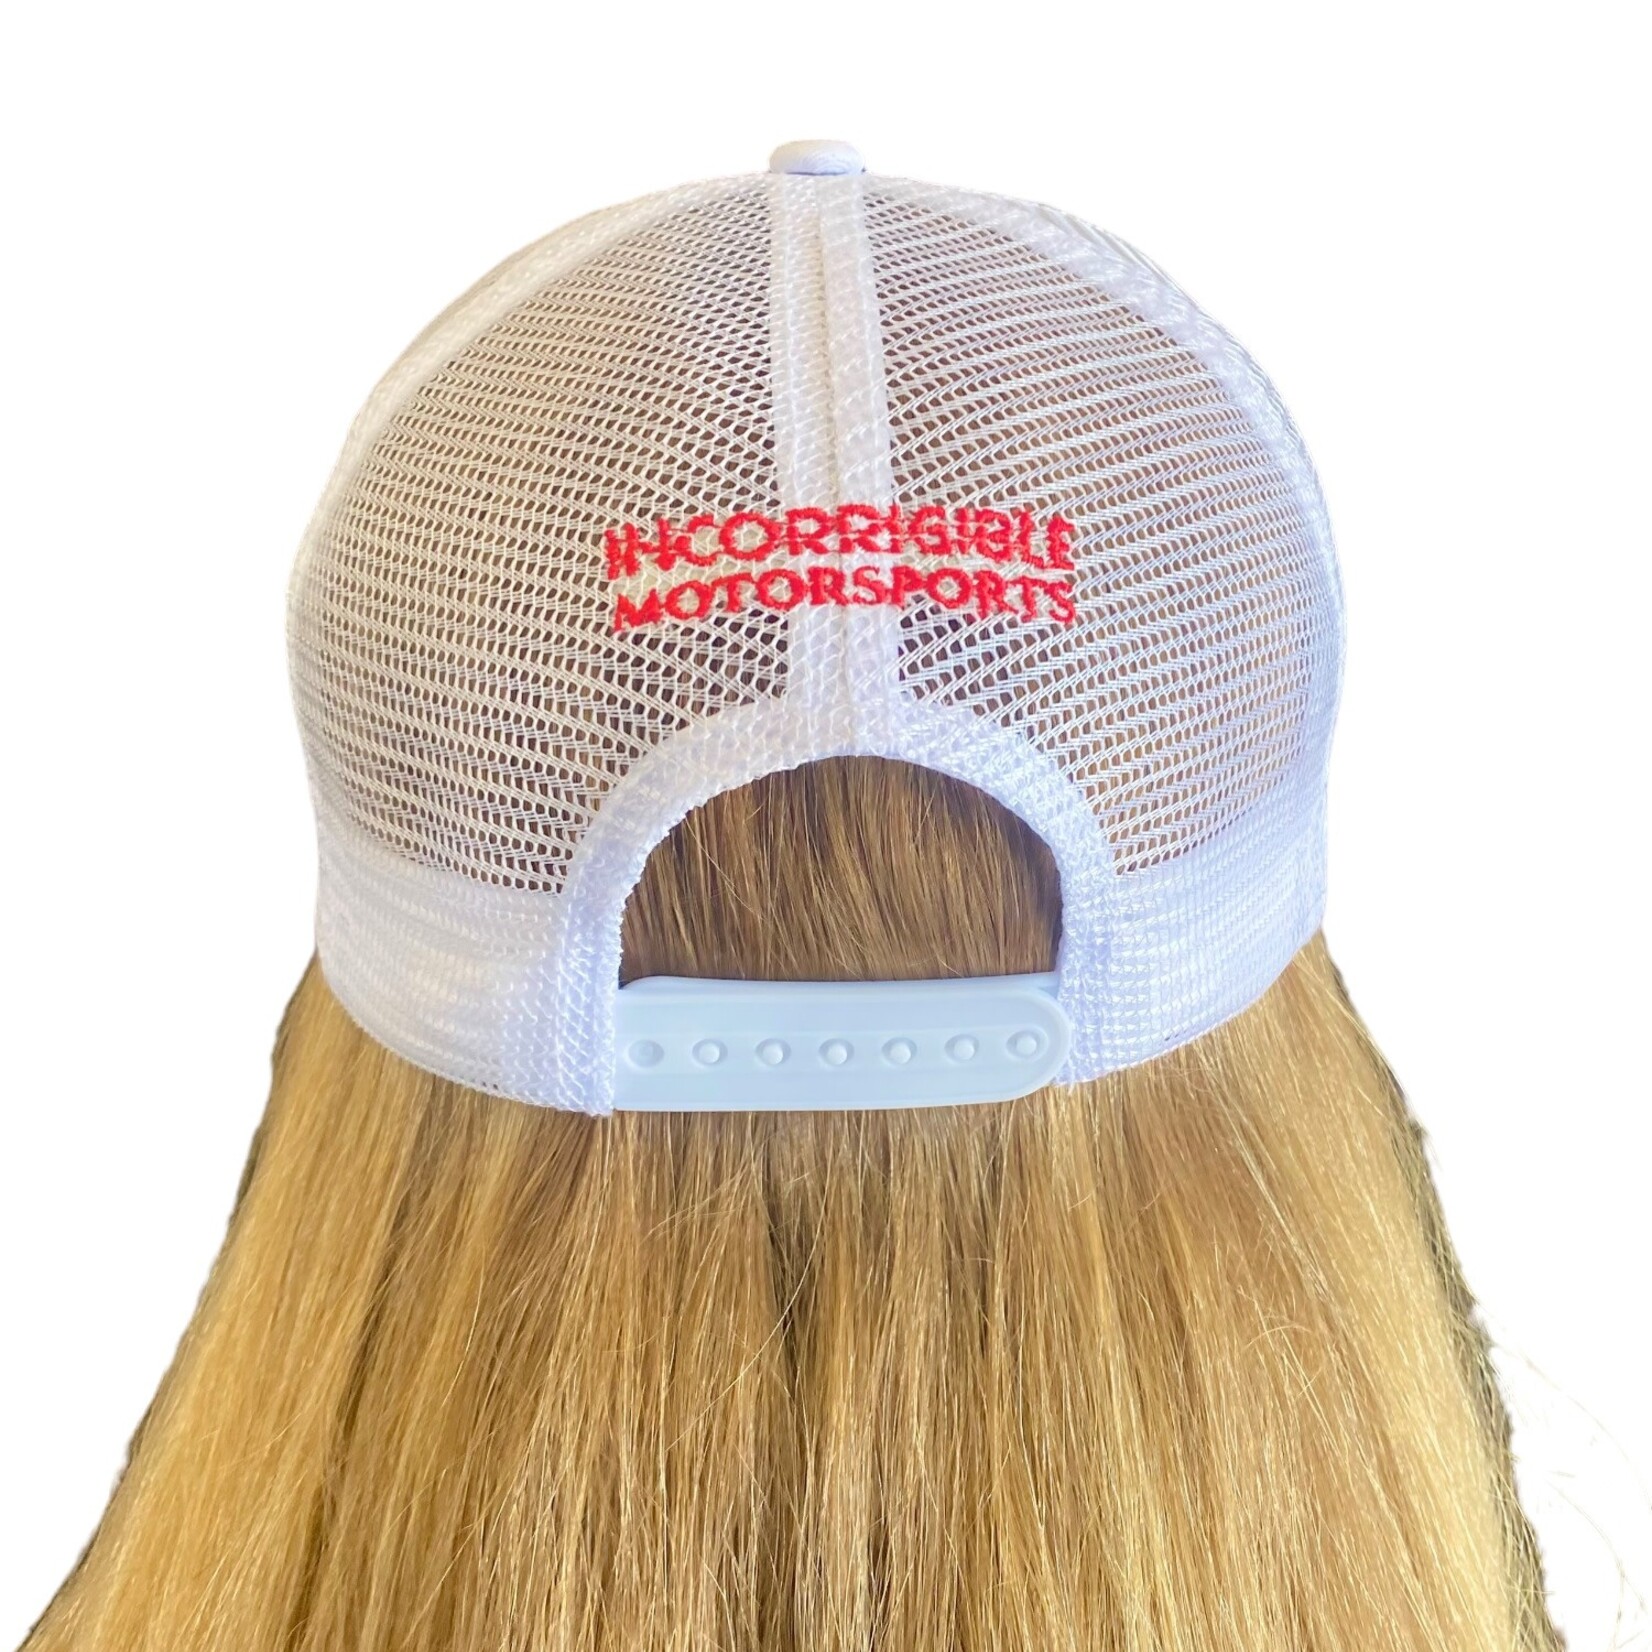 INCORRIGIBLE MOTORSPORTS "JANKY" RACE CAR HAT EMBROIDERED 6 PANEL STRUCTURED MESH SNAP BACK